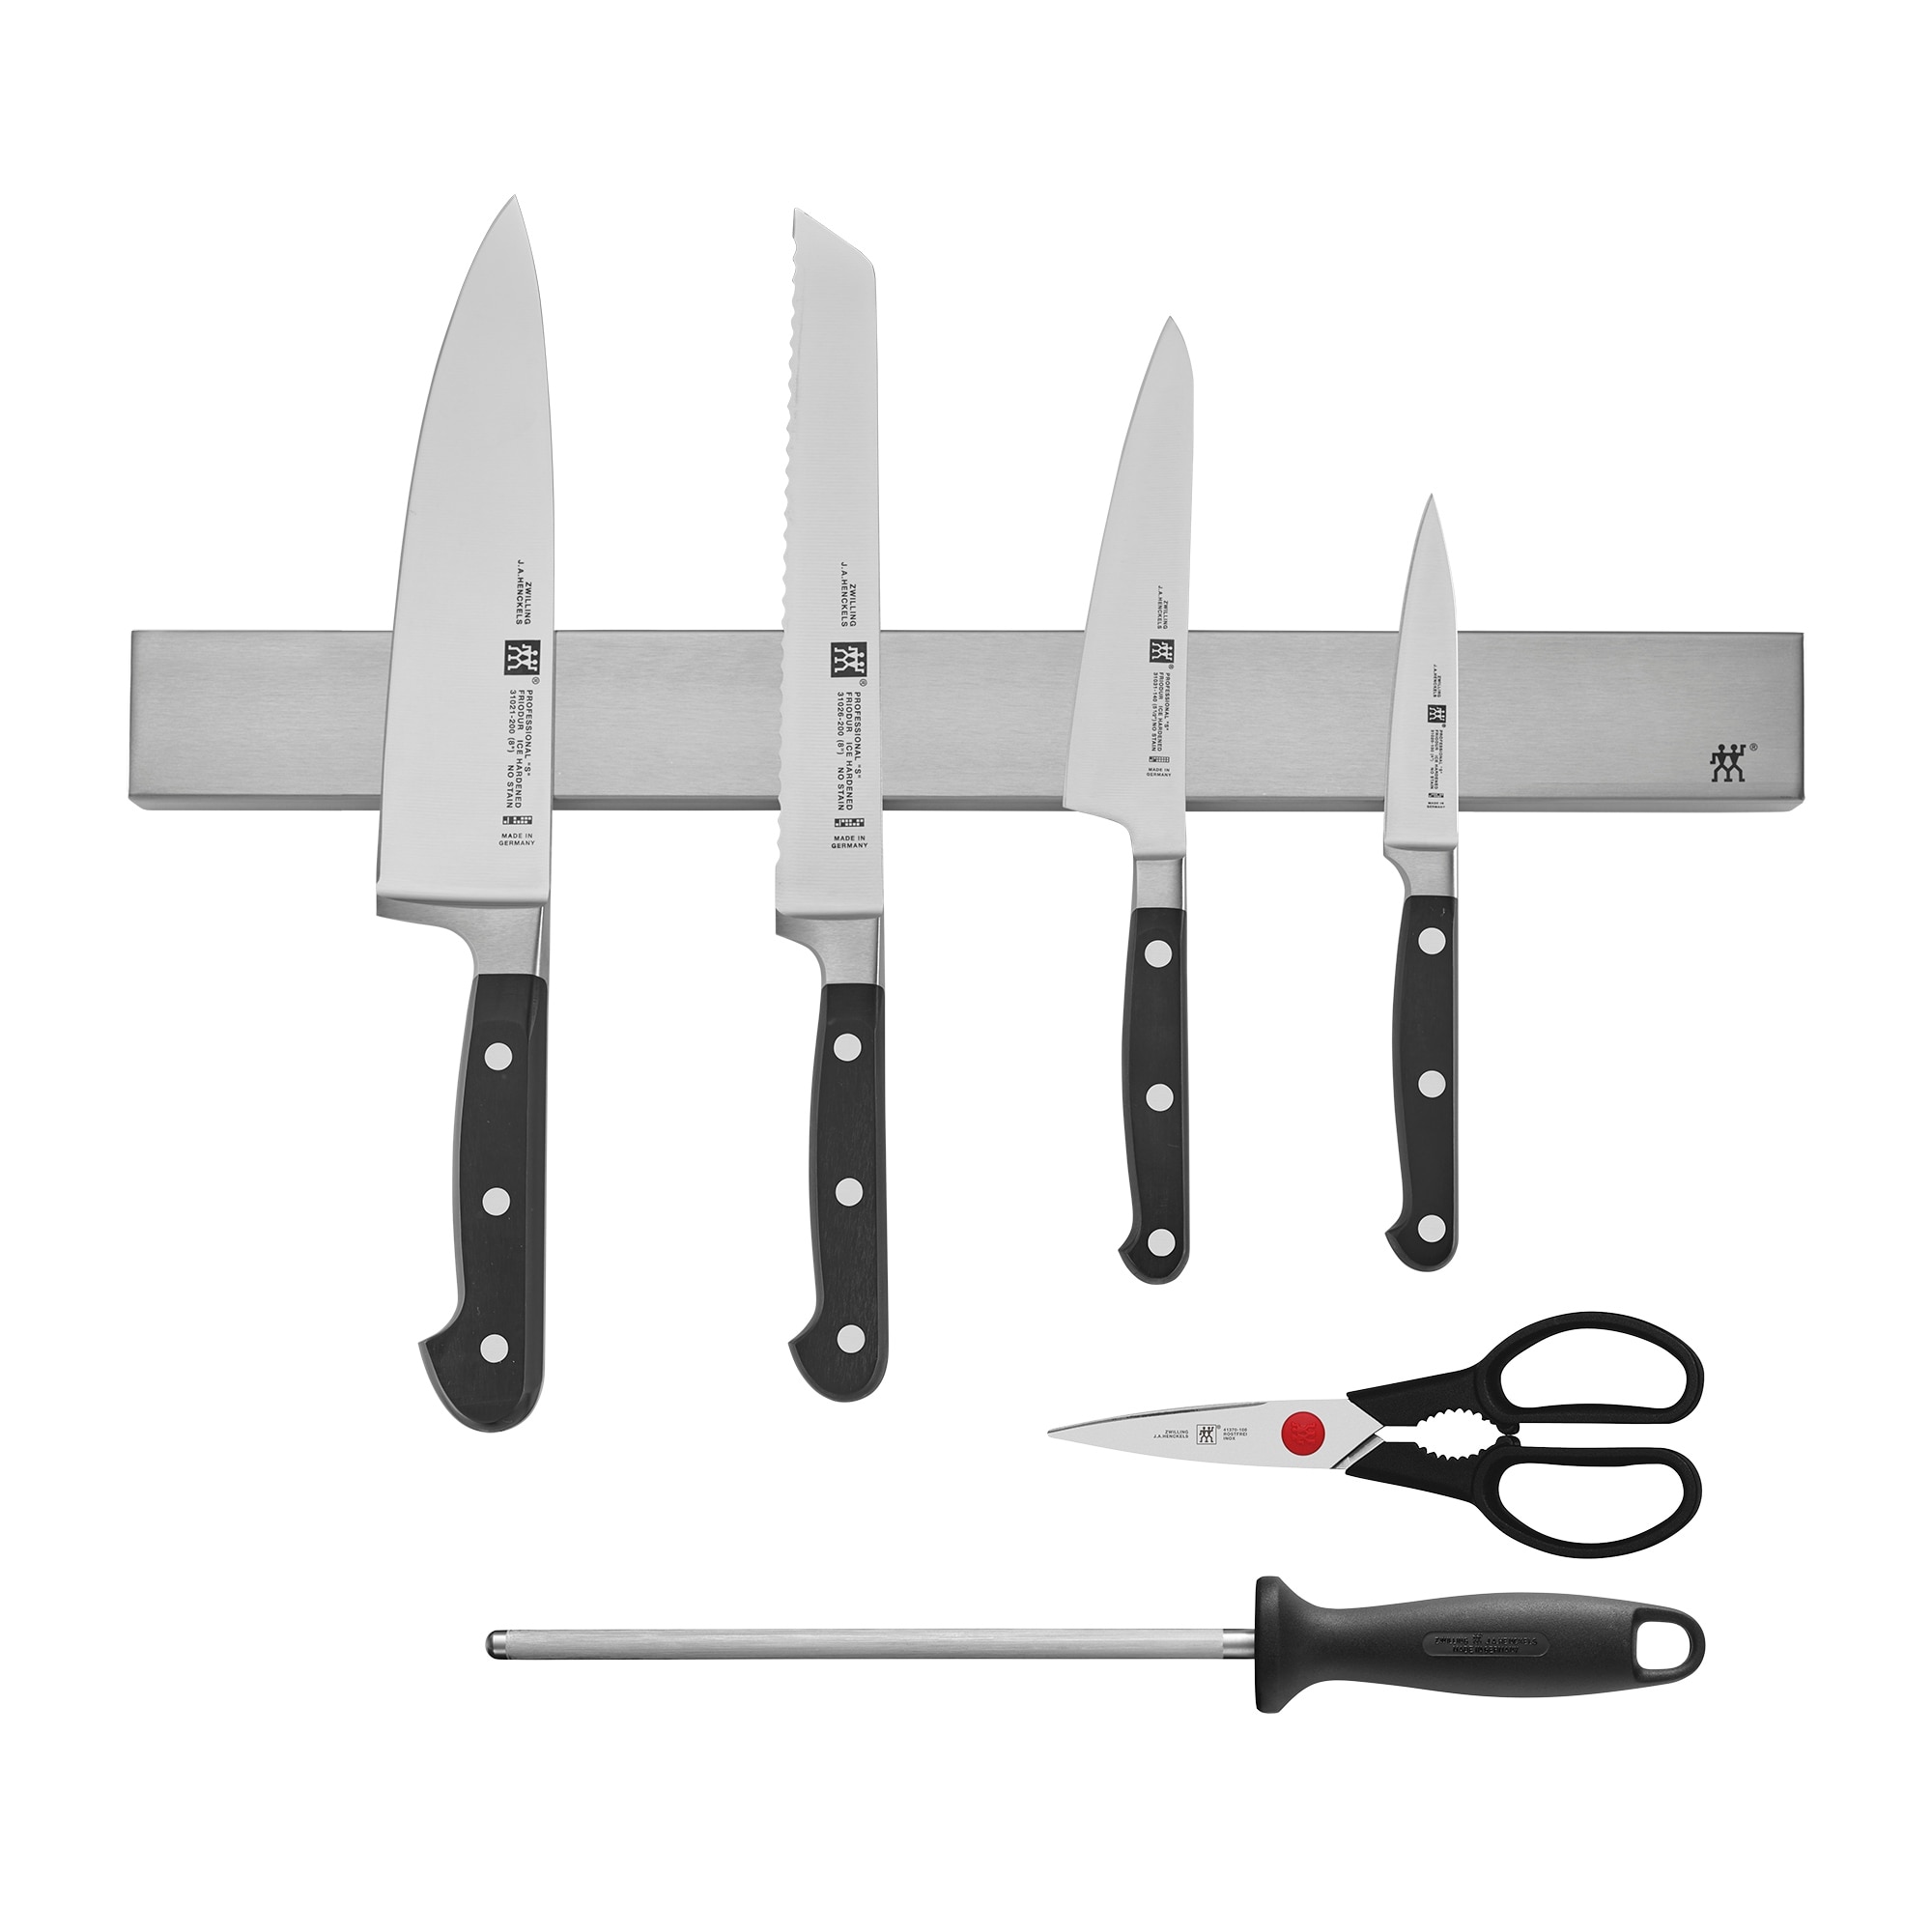 https://ak1.ostkcdn.com/images/products/is/images/direct/73ffc3d80ac0c35cd7973bec22af8f16cf624d58/ZWILLING-J.A.-Henckels-Professional-%22S%22-7-pc-Knife-Set-With-17.5%22-Stainless-Magnetic-Knife-Bar.jpg